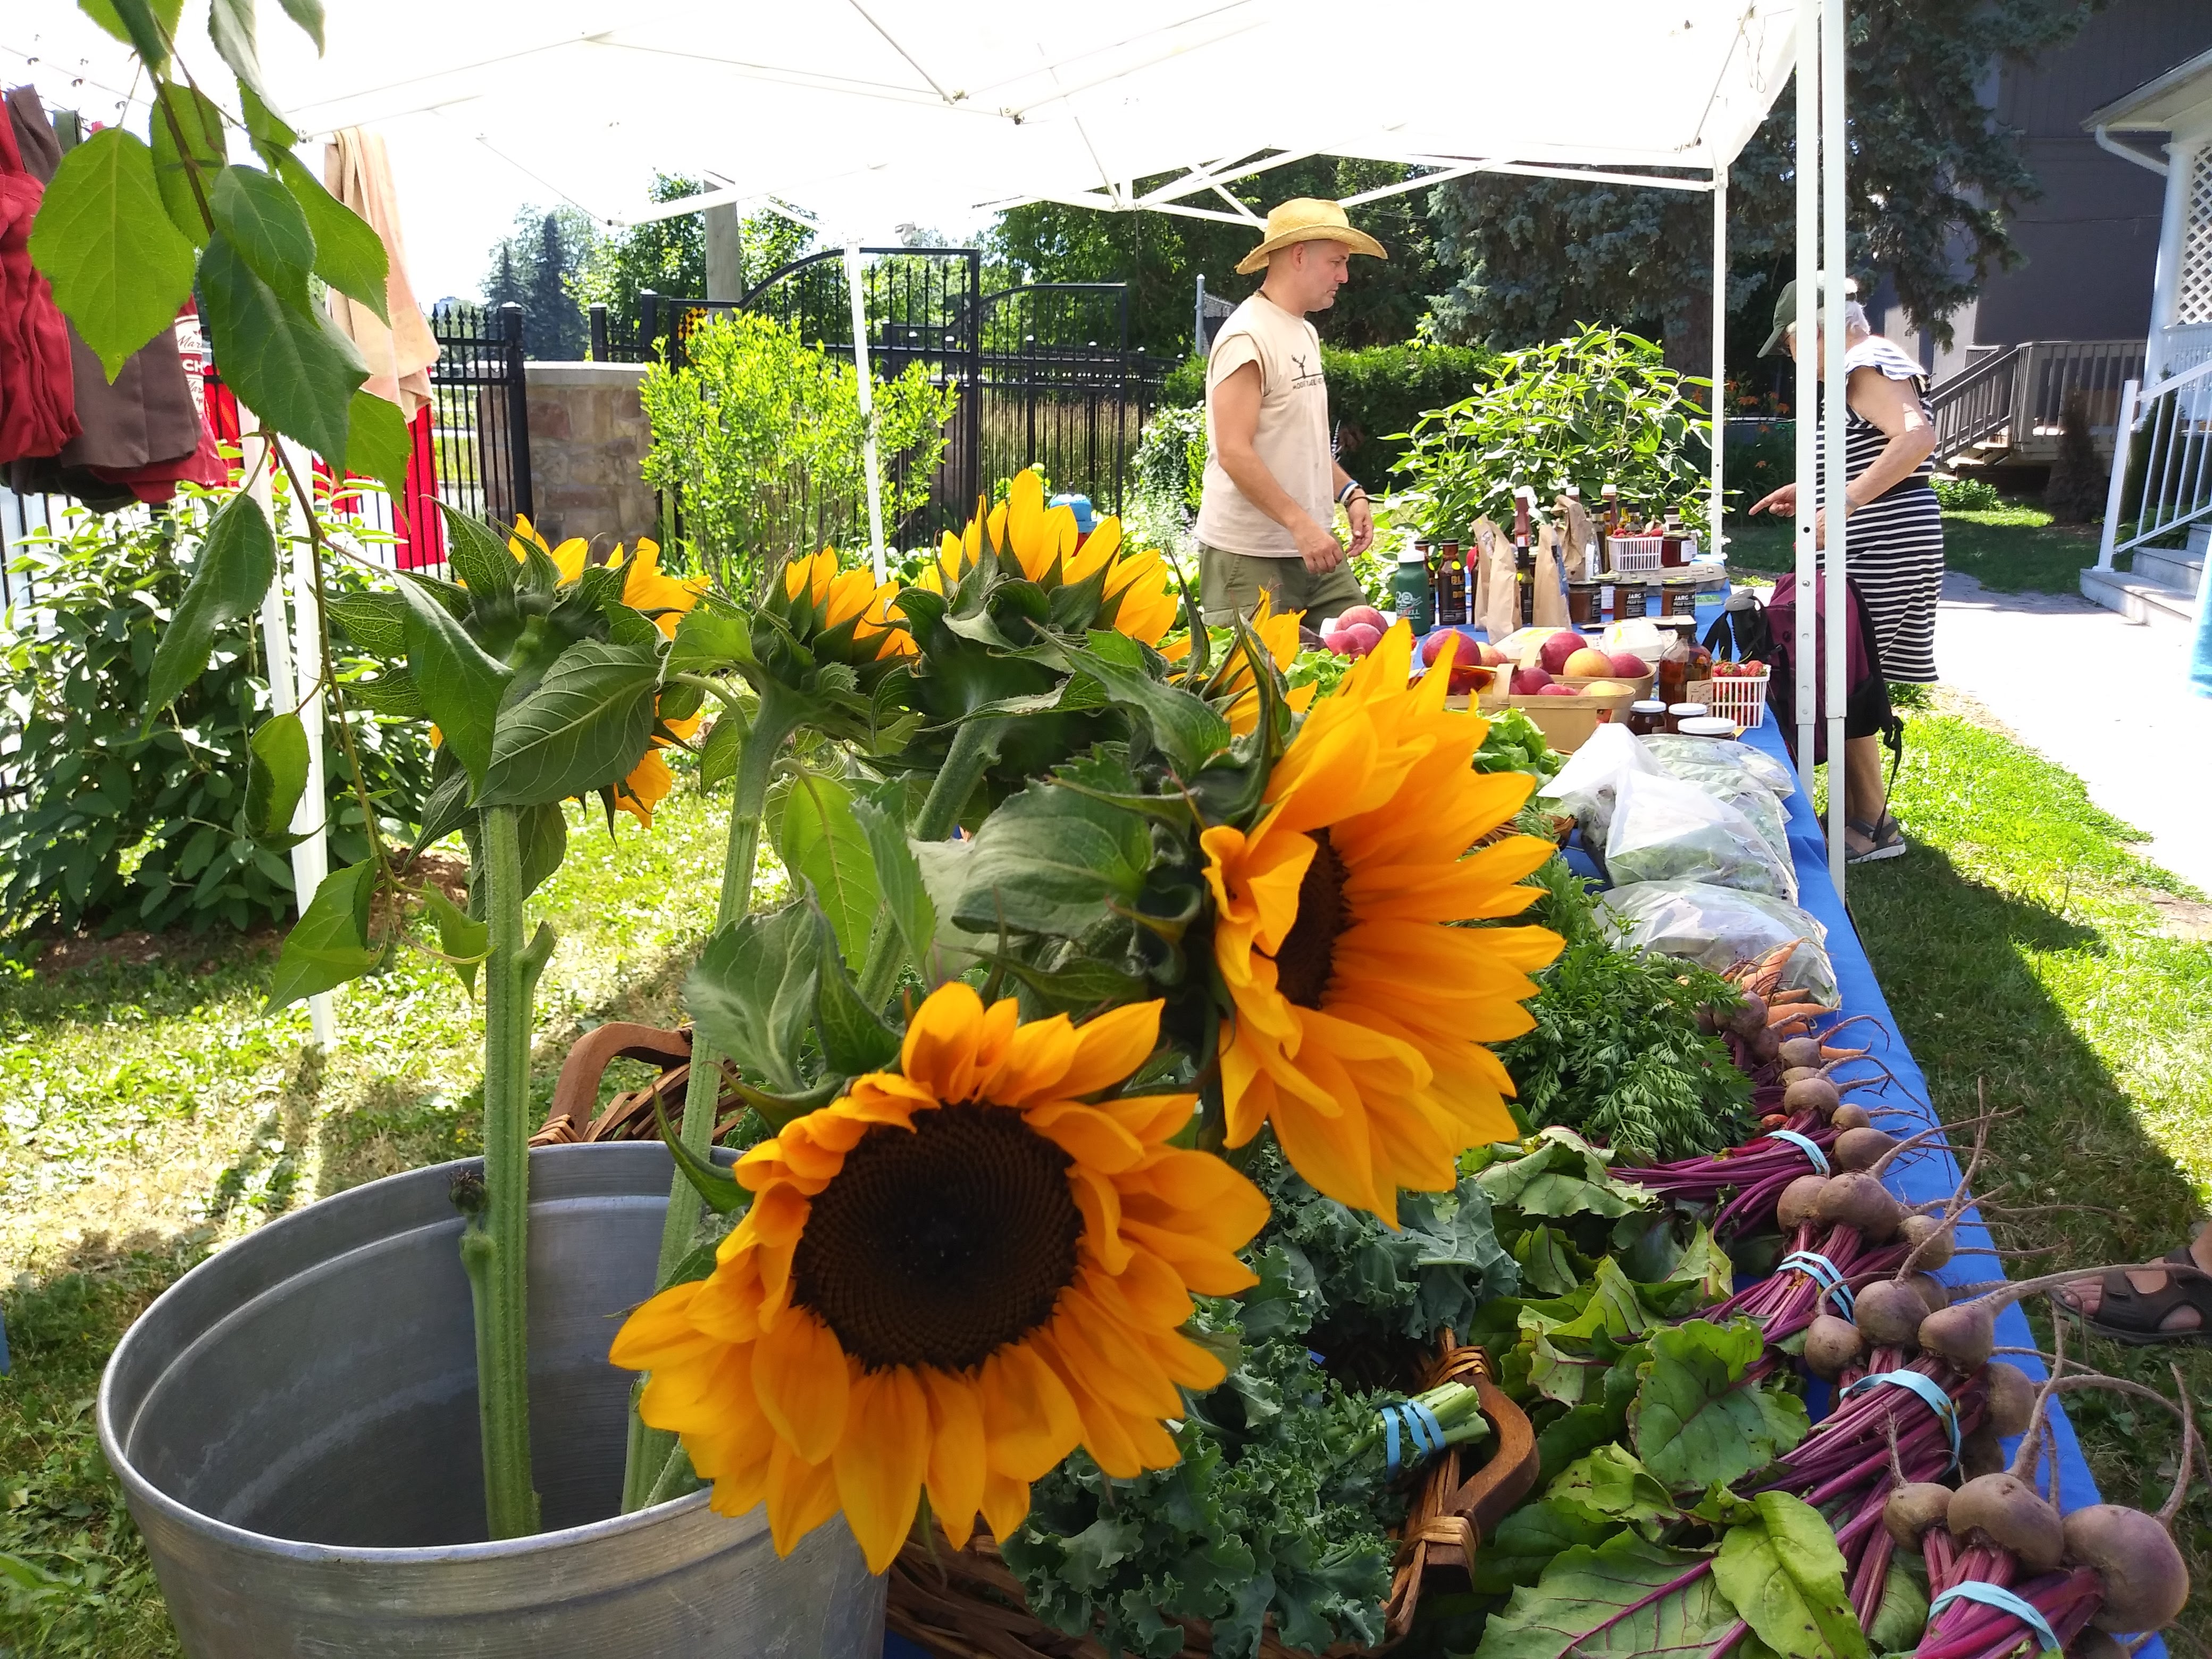 The importance of farmers' markets as food distributors